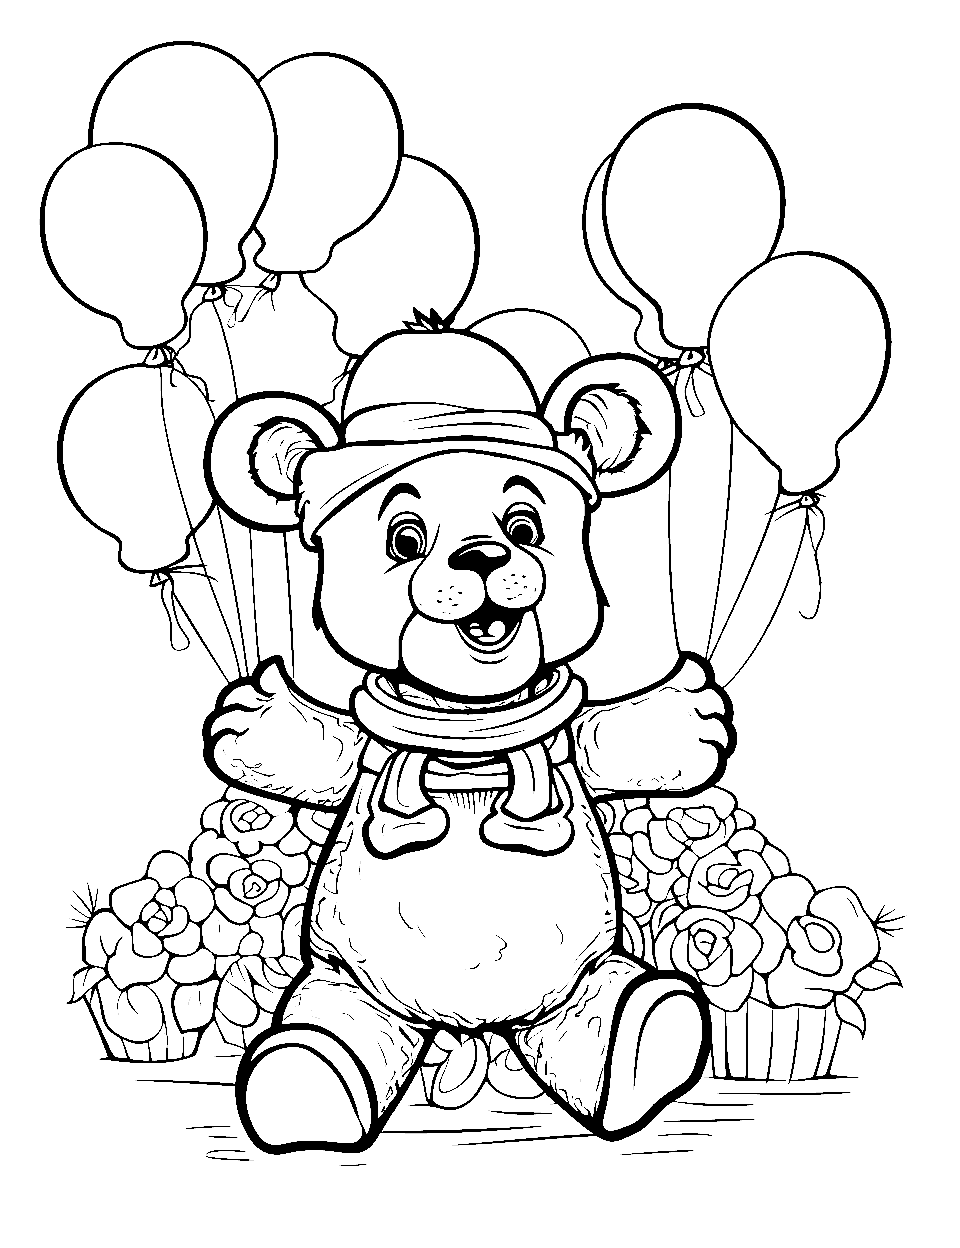 Freddy Bear’s Balloon Party Coloring Page - Freddy Dressed as a normal bear surrounded by colorful balloons in a playful environment.